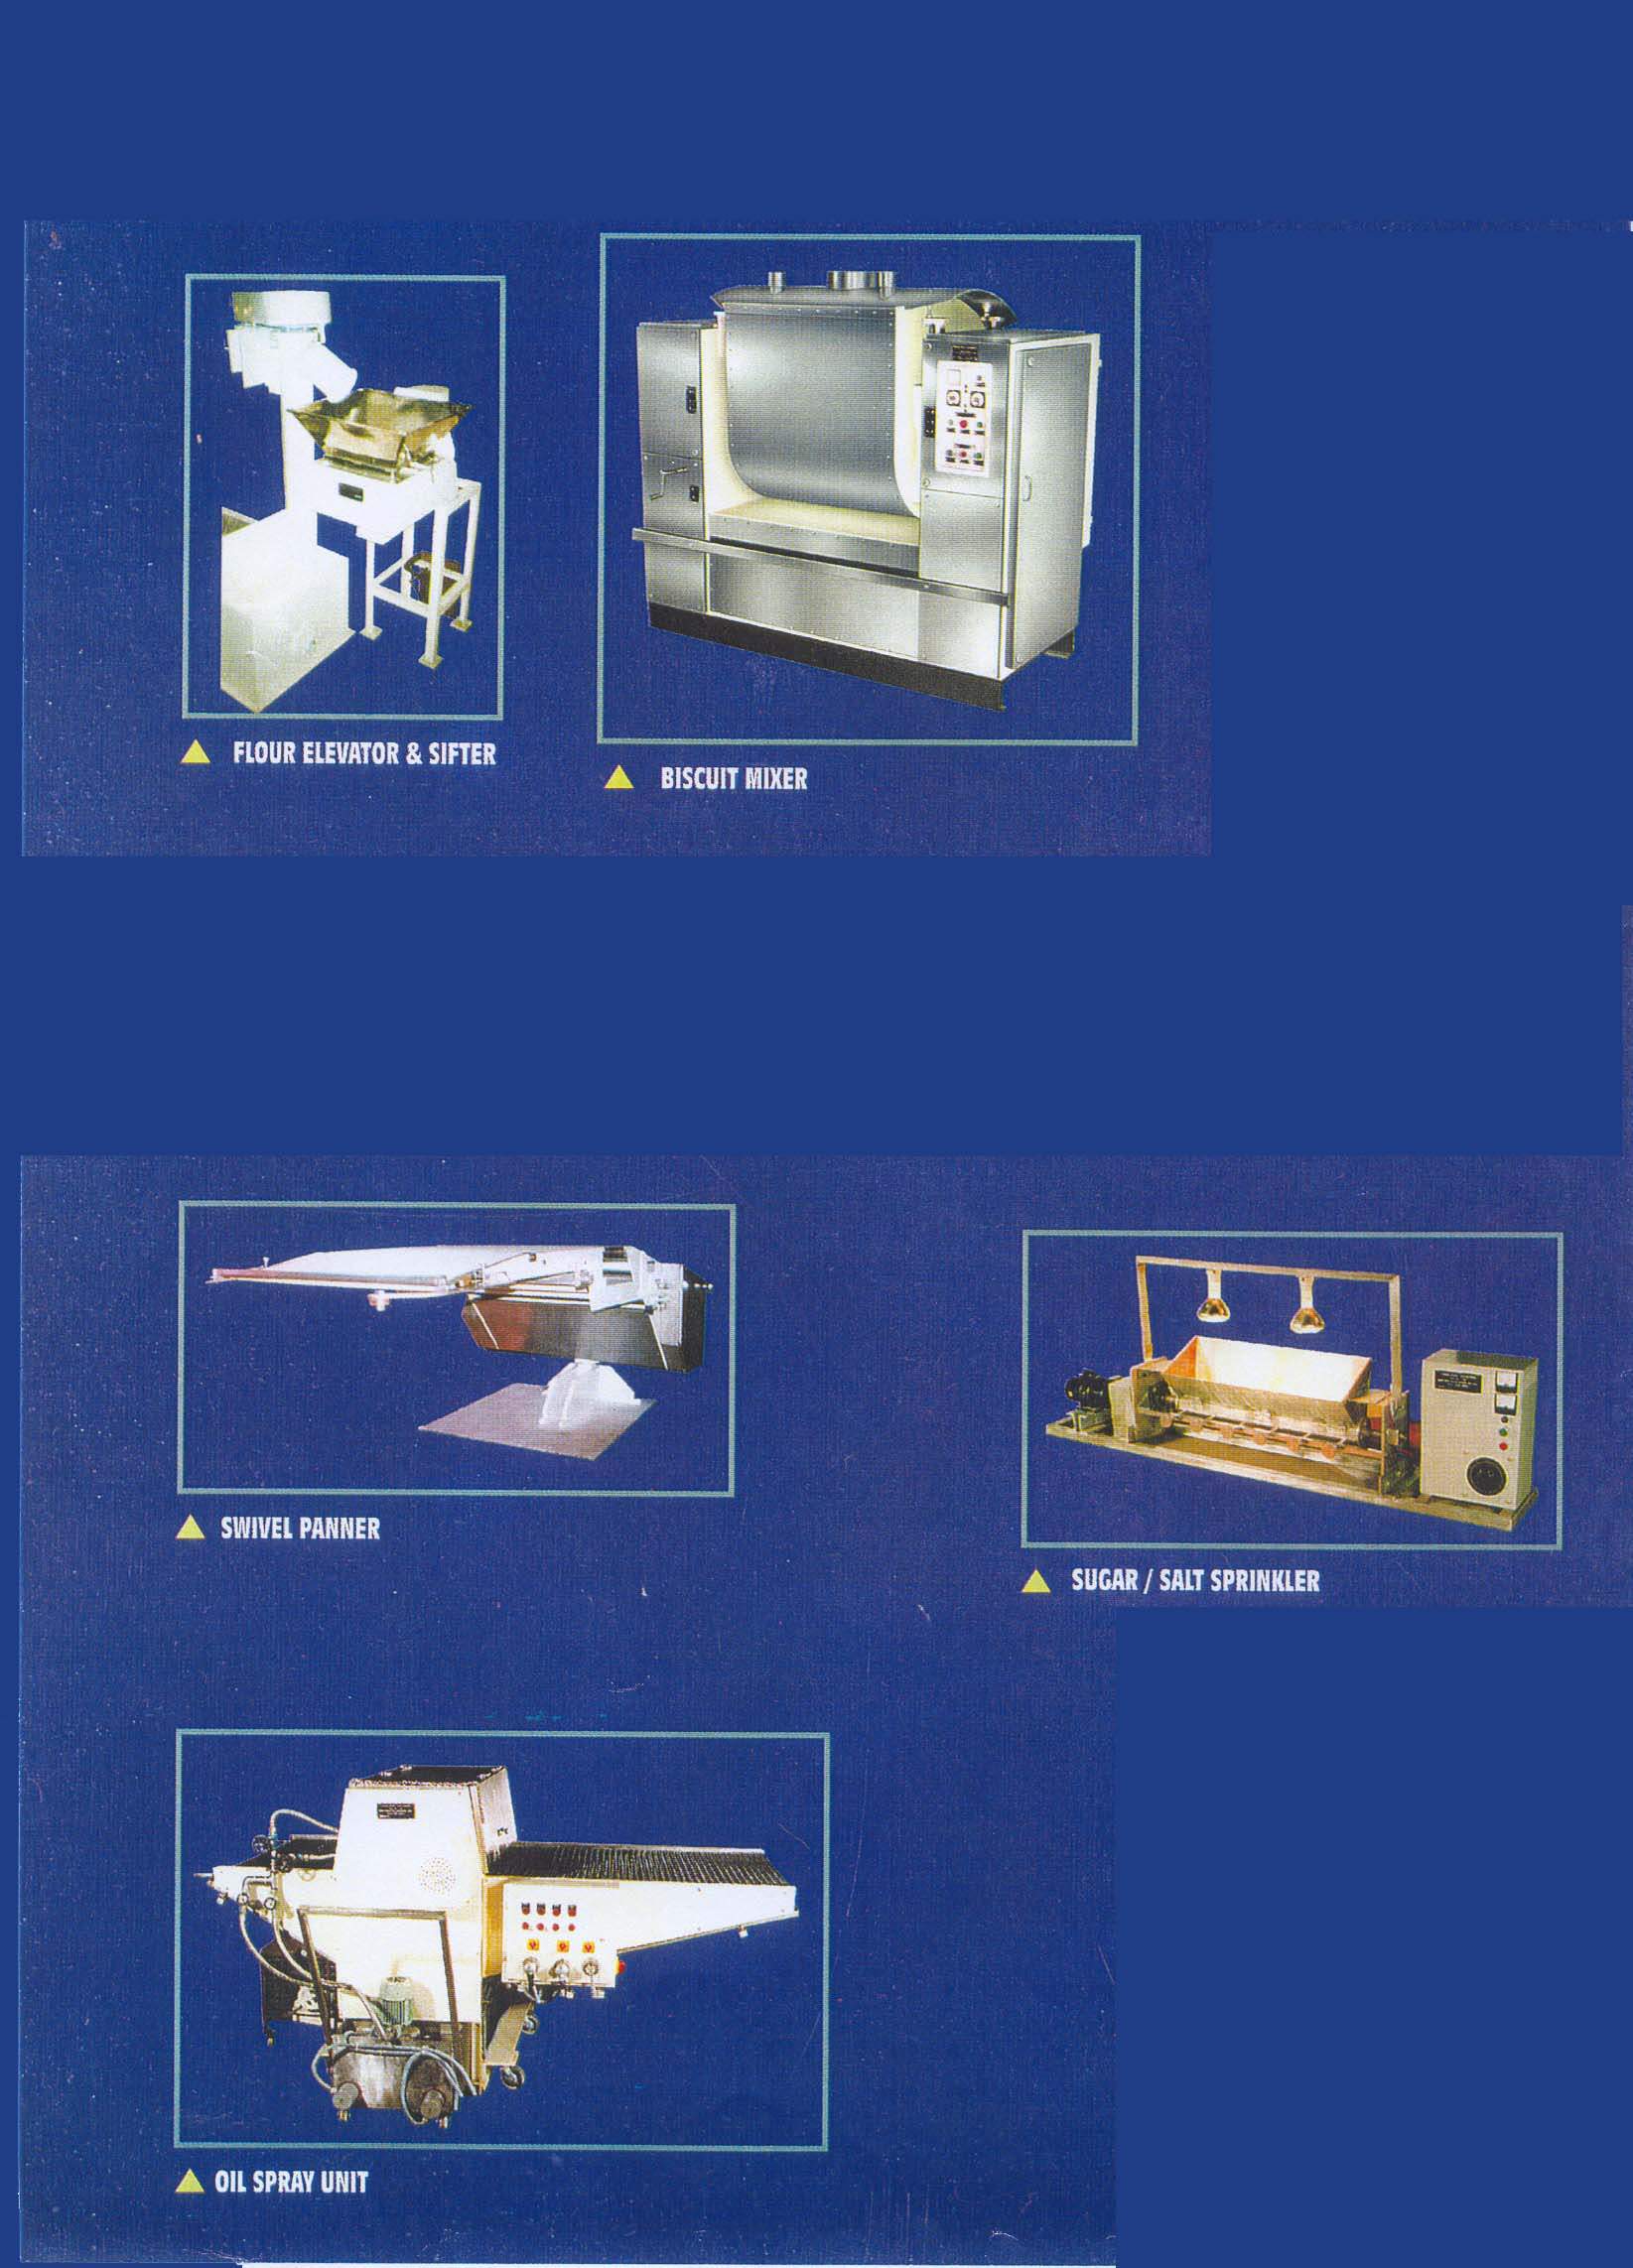 Biscuit Machinery